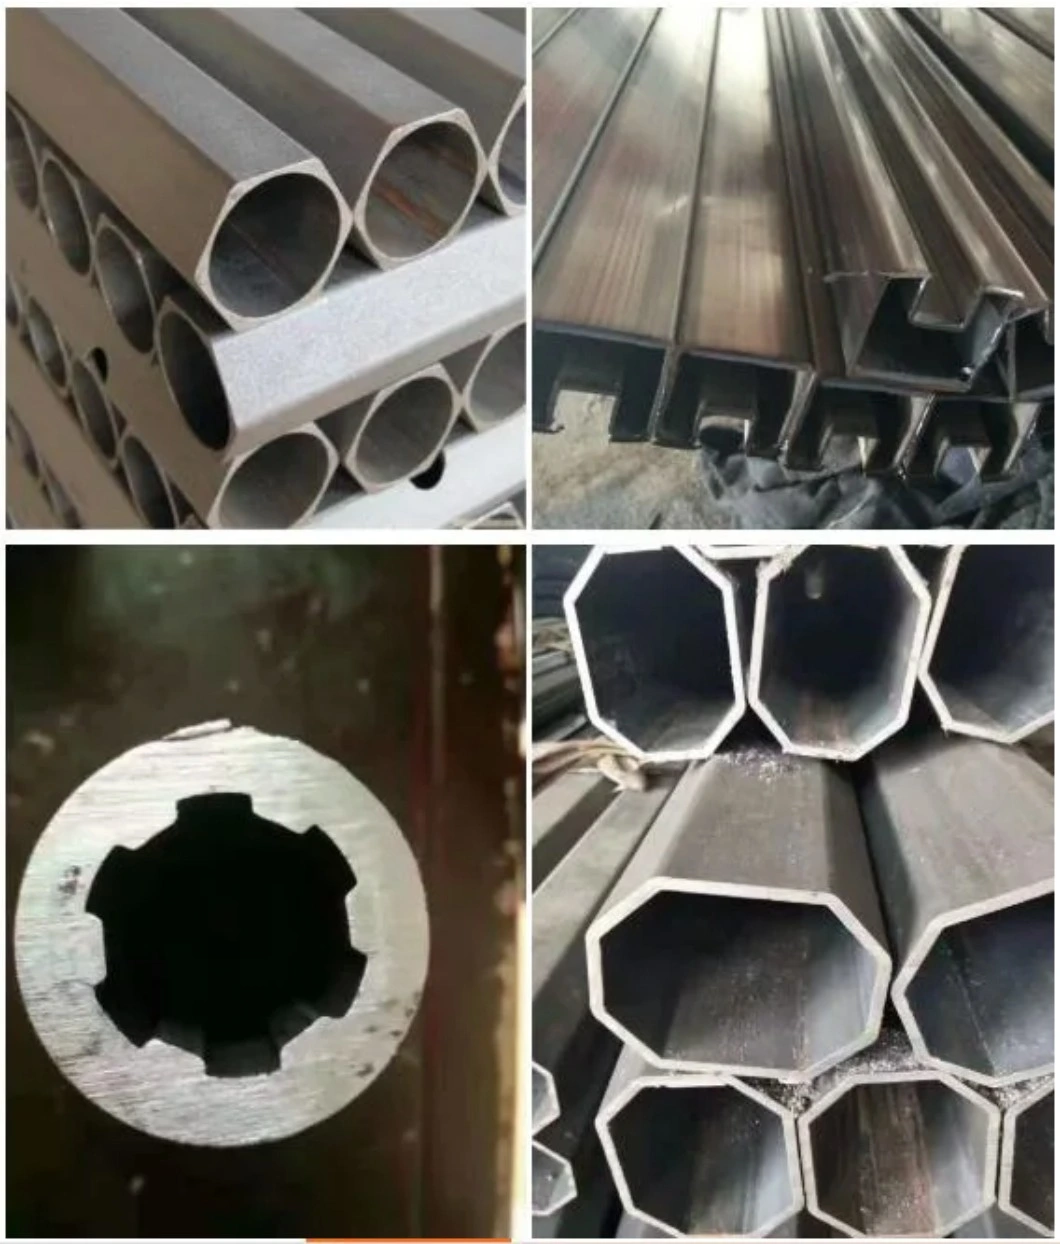 Hot Sales Hot Rolled Cold Rolled Cold Drawn Customized Special-Shaped Steel Tube ASTM 1024 Mechanical Tube Hexagonal Tube Octagonal Tube